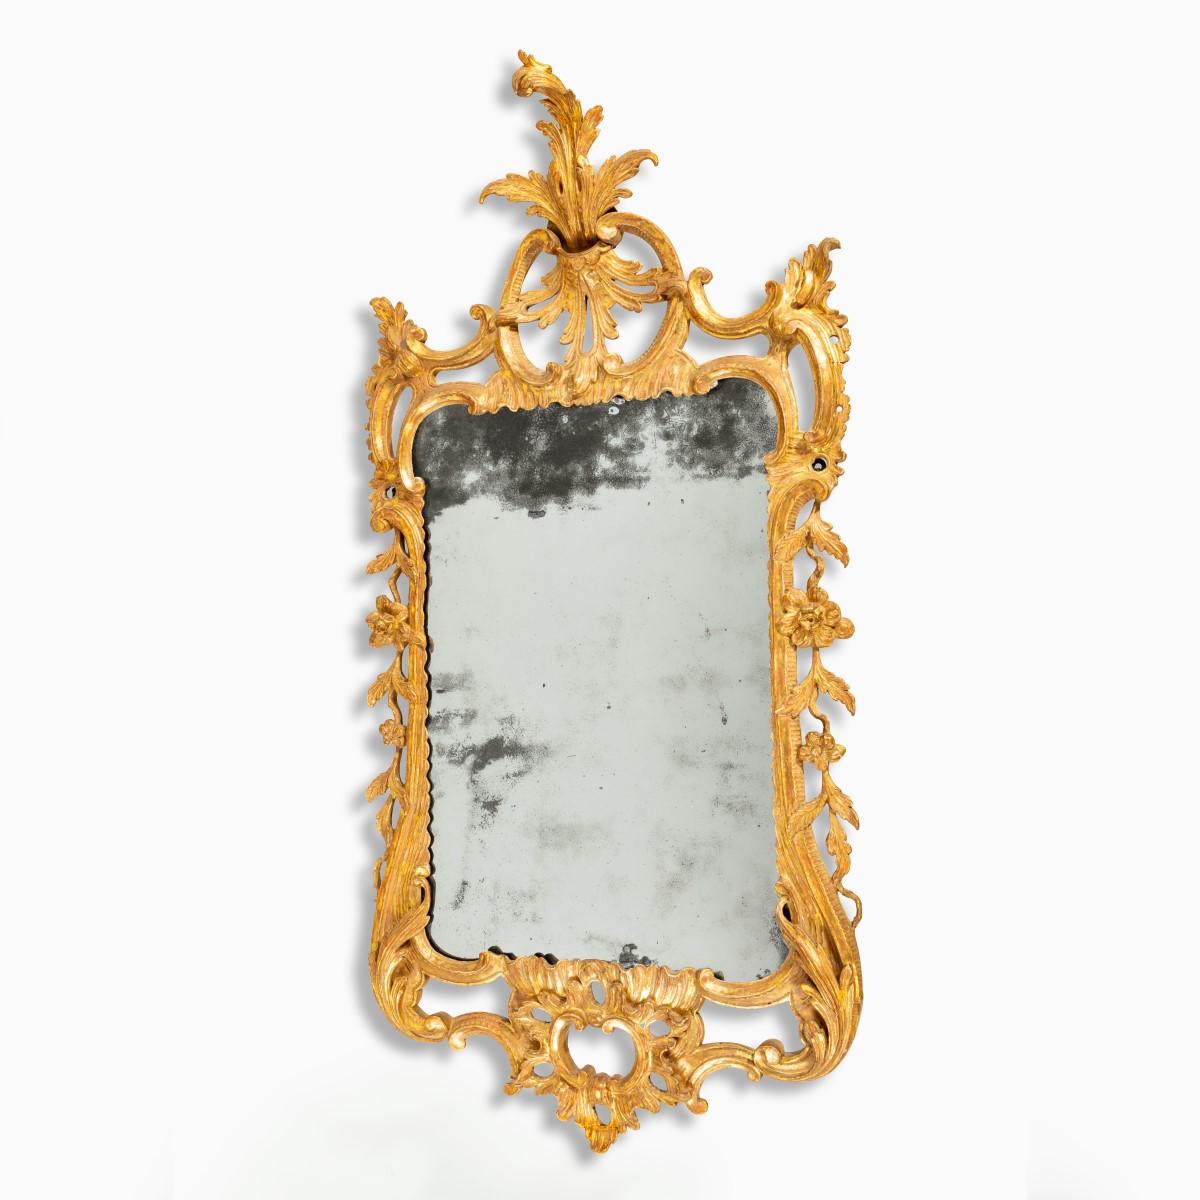 A Georgian Chippendale period gilt-wood mirror, the original rectangular mirror plate with rounded corners within an openwork carved gilt-wood frame comprising rocailles, pendant flowers, C-scrolls and foliage, the cresting with scrolls centred on a